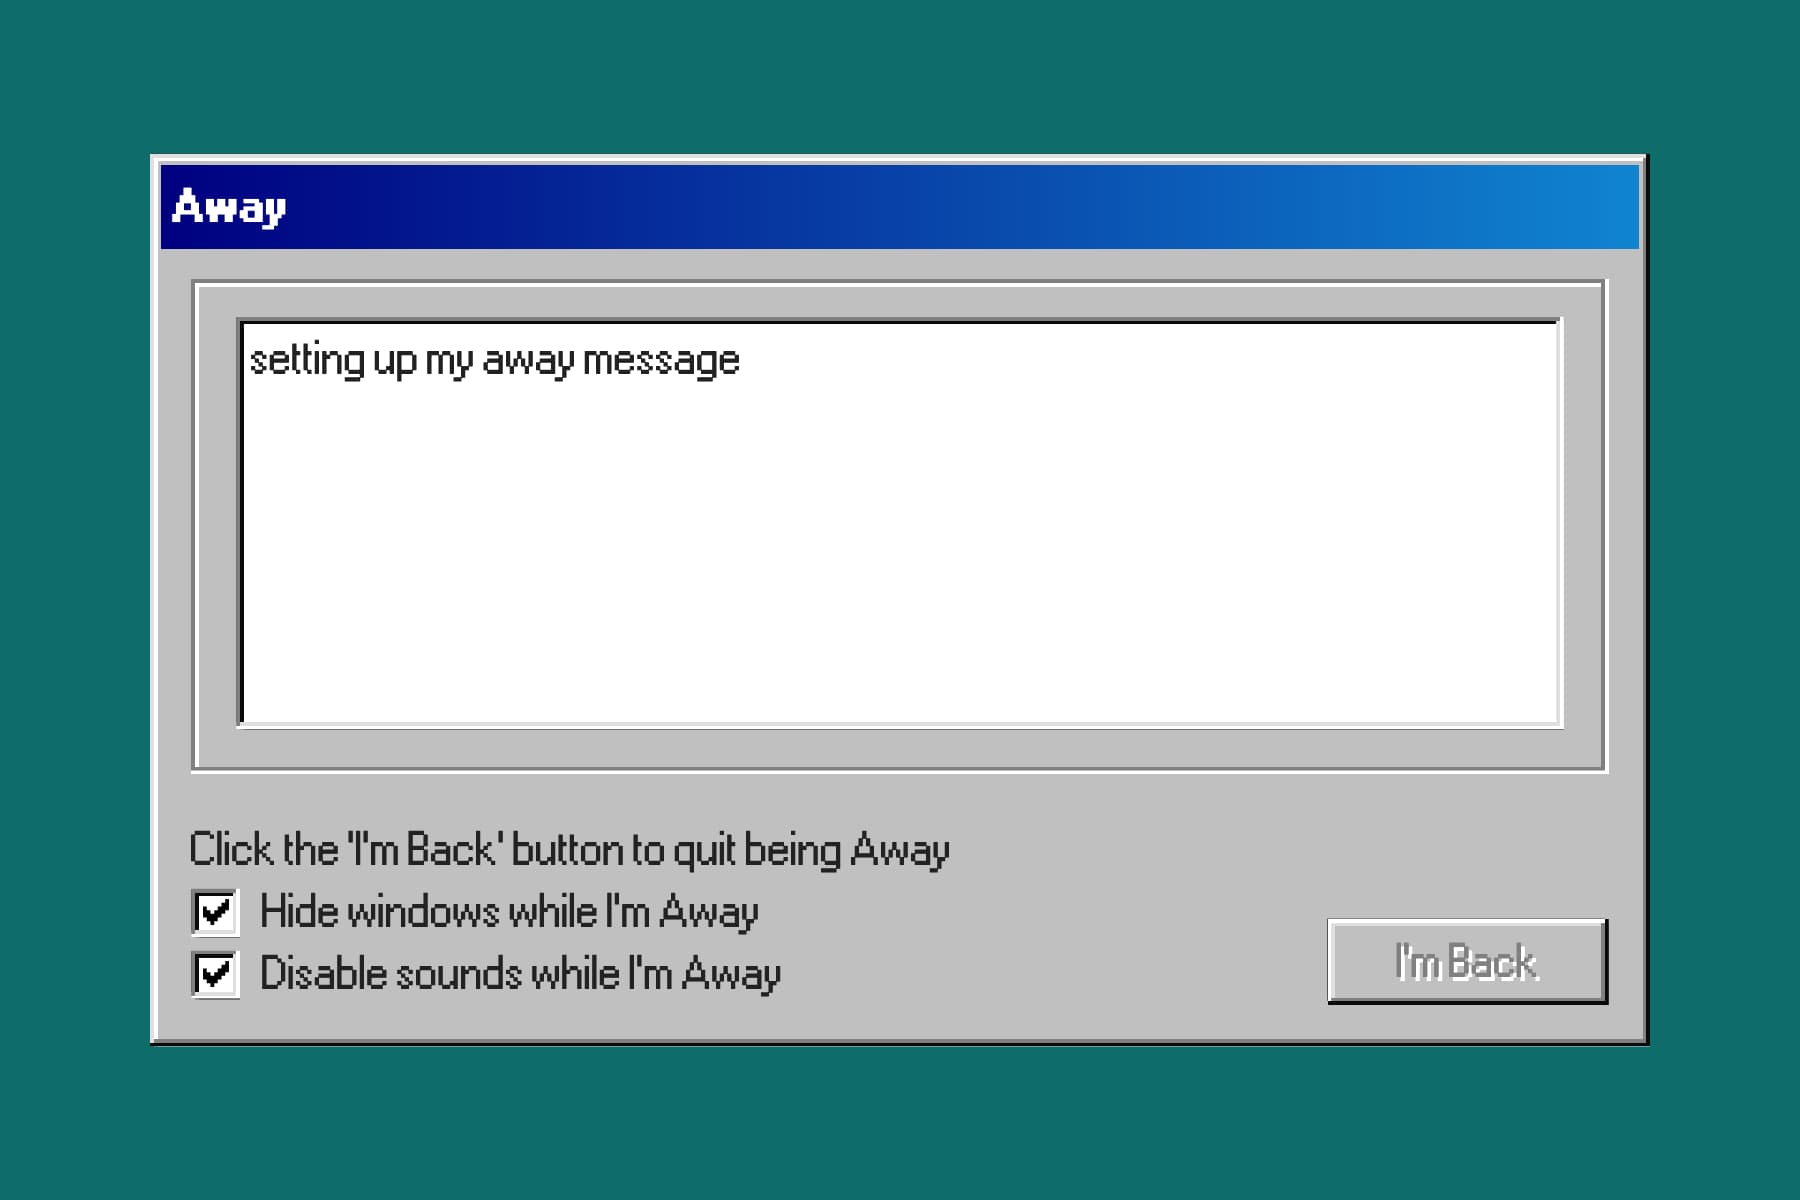 A web page styled to look like a Windows 98 window with the title 'Away' and a message that reads 'setting up my away message'